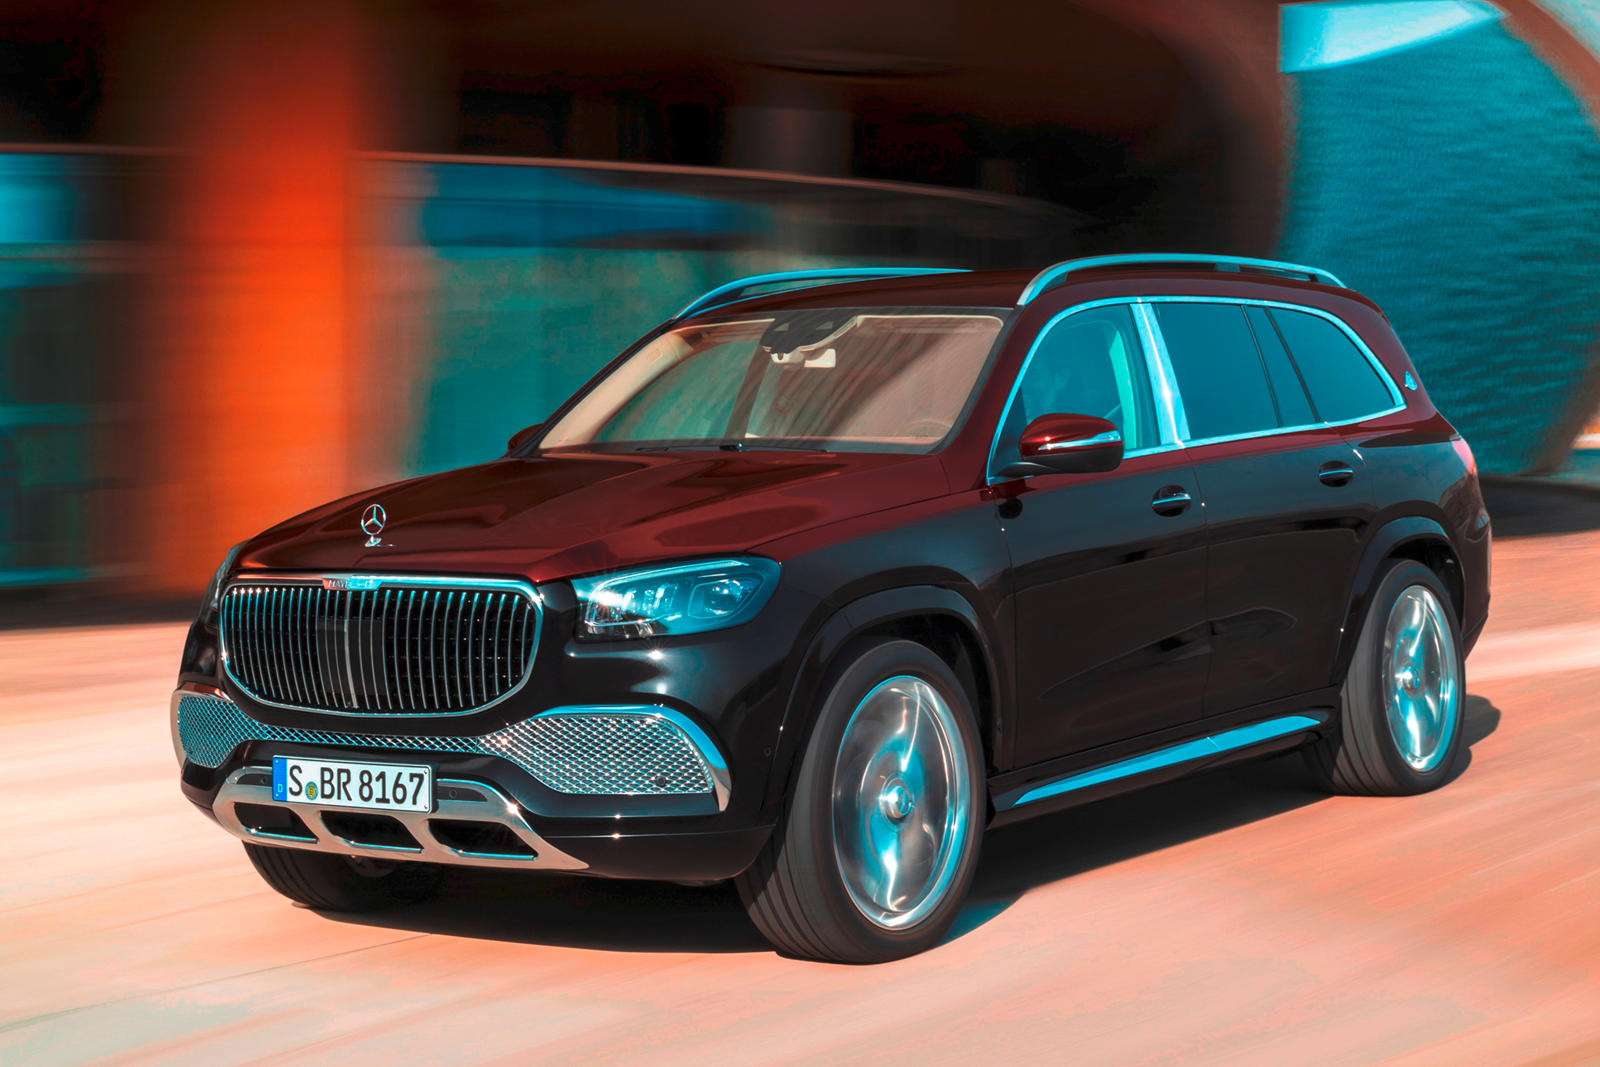 used mercedes gls New 2021 mercedes-maybach s-class revealed as ultra-luxury flagship